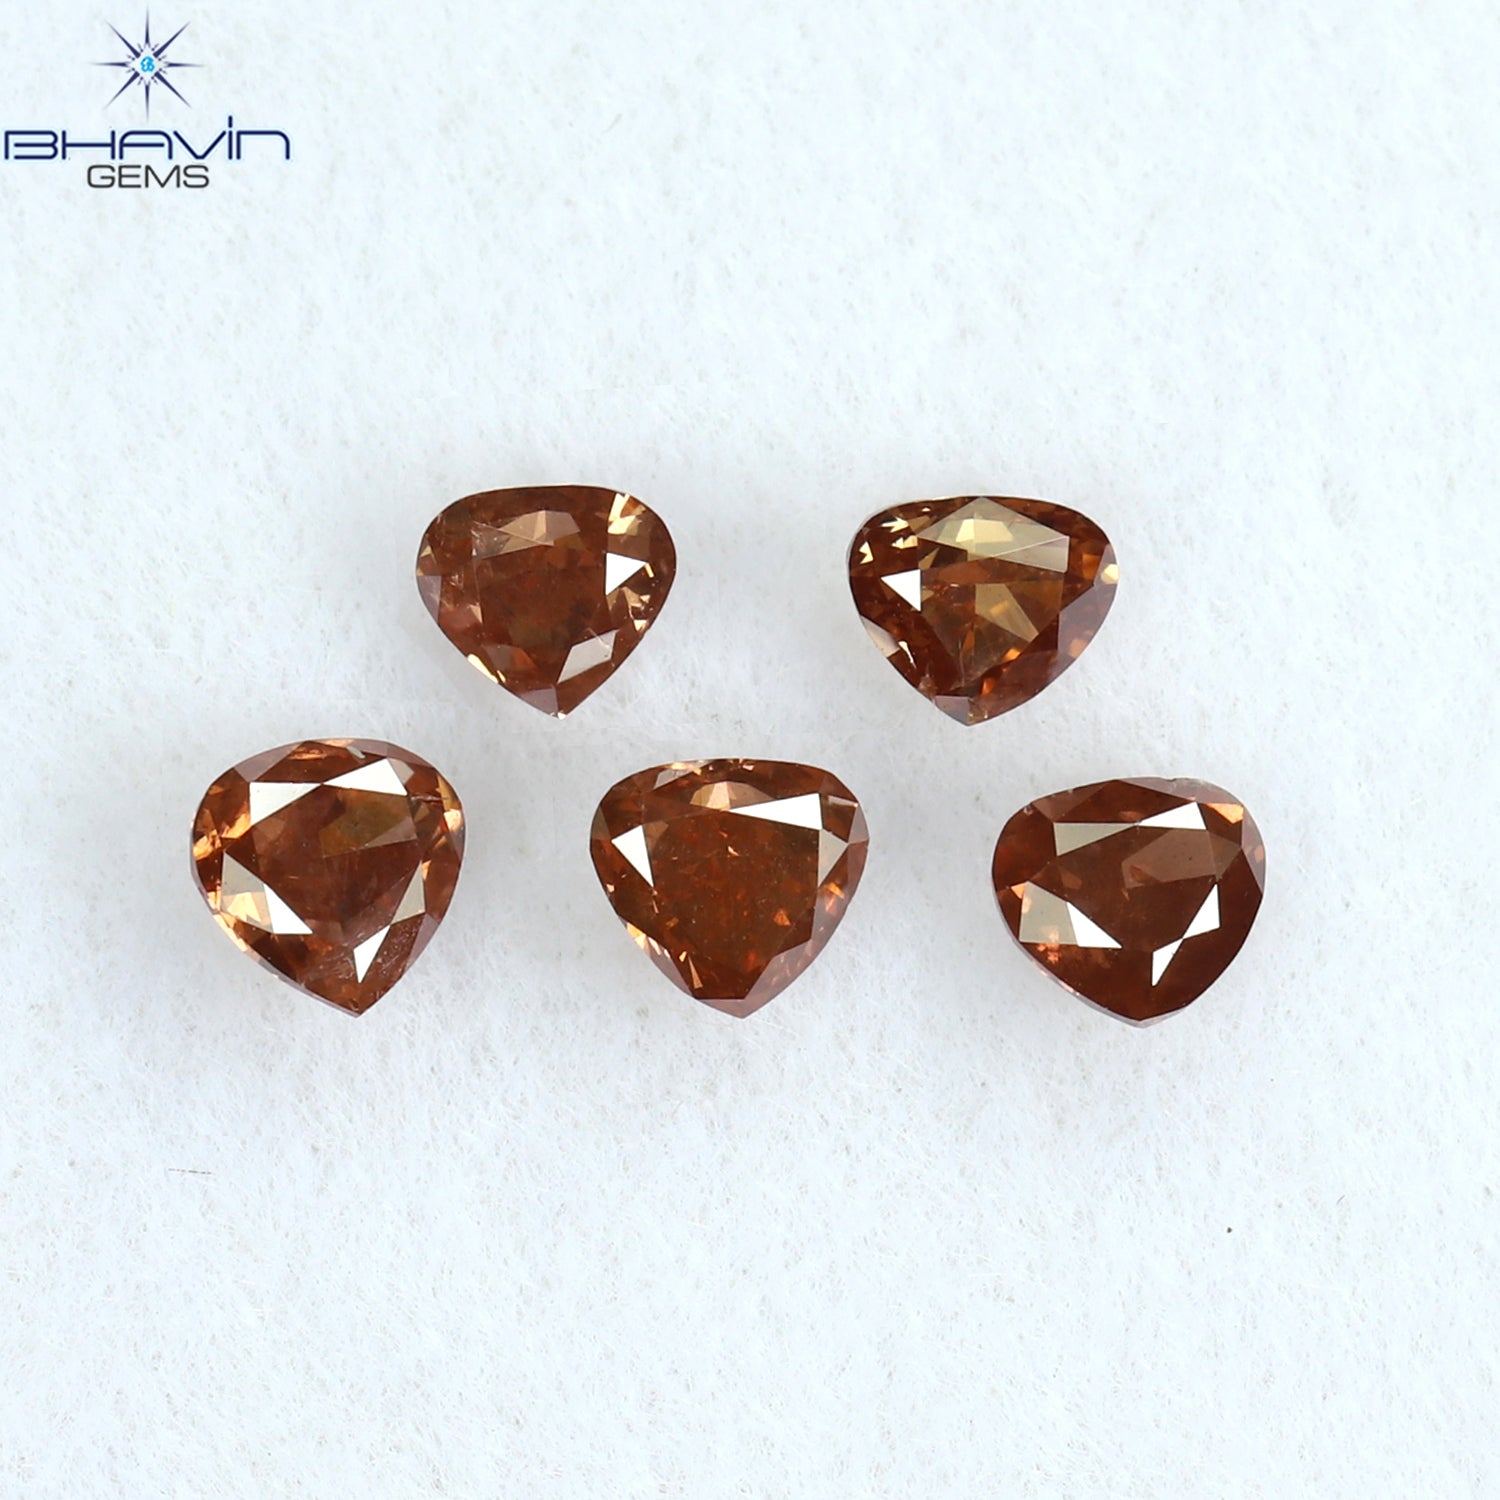 0.64 CT/5 Pcs Heart Shape Natural Loose Diamond Pink Color SI1 Clarity (3.20 MM)